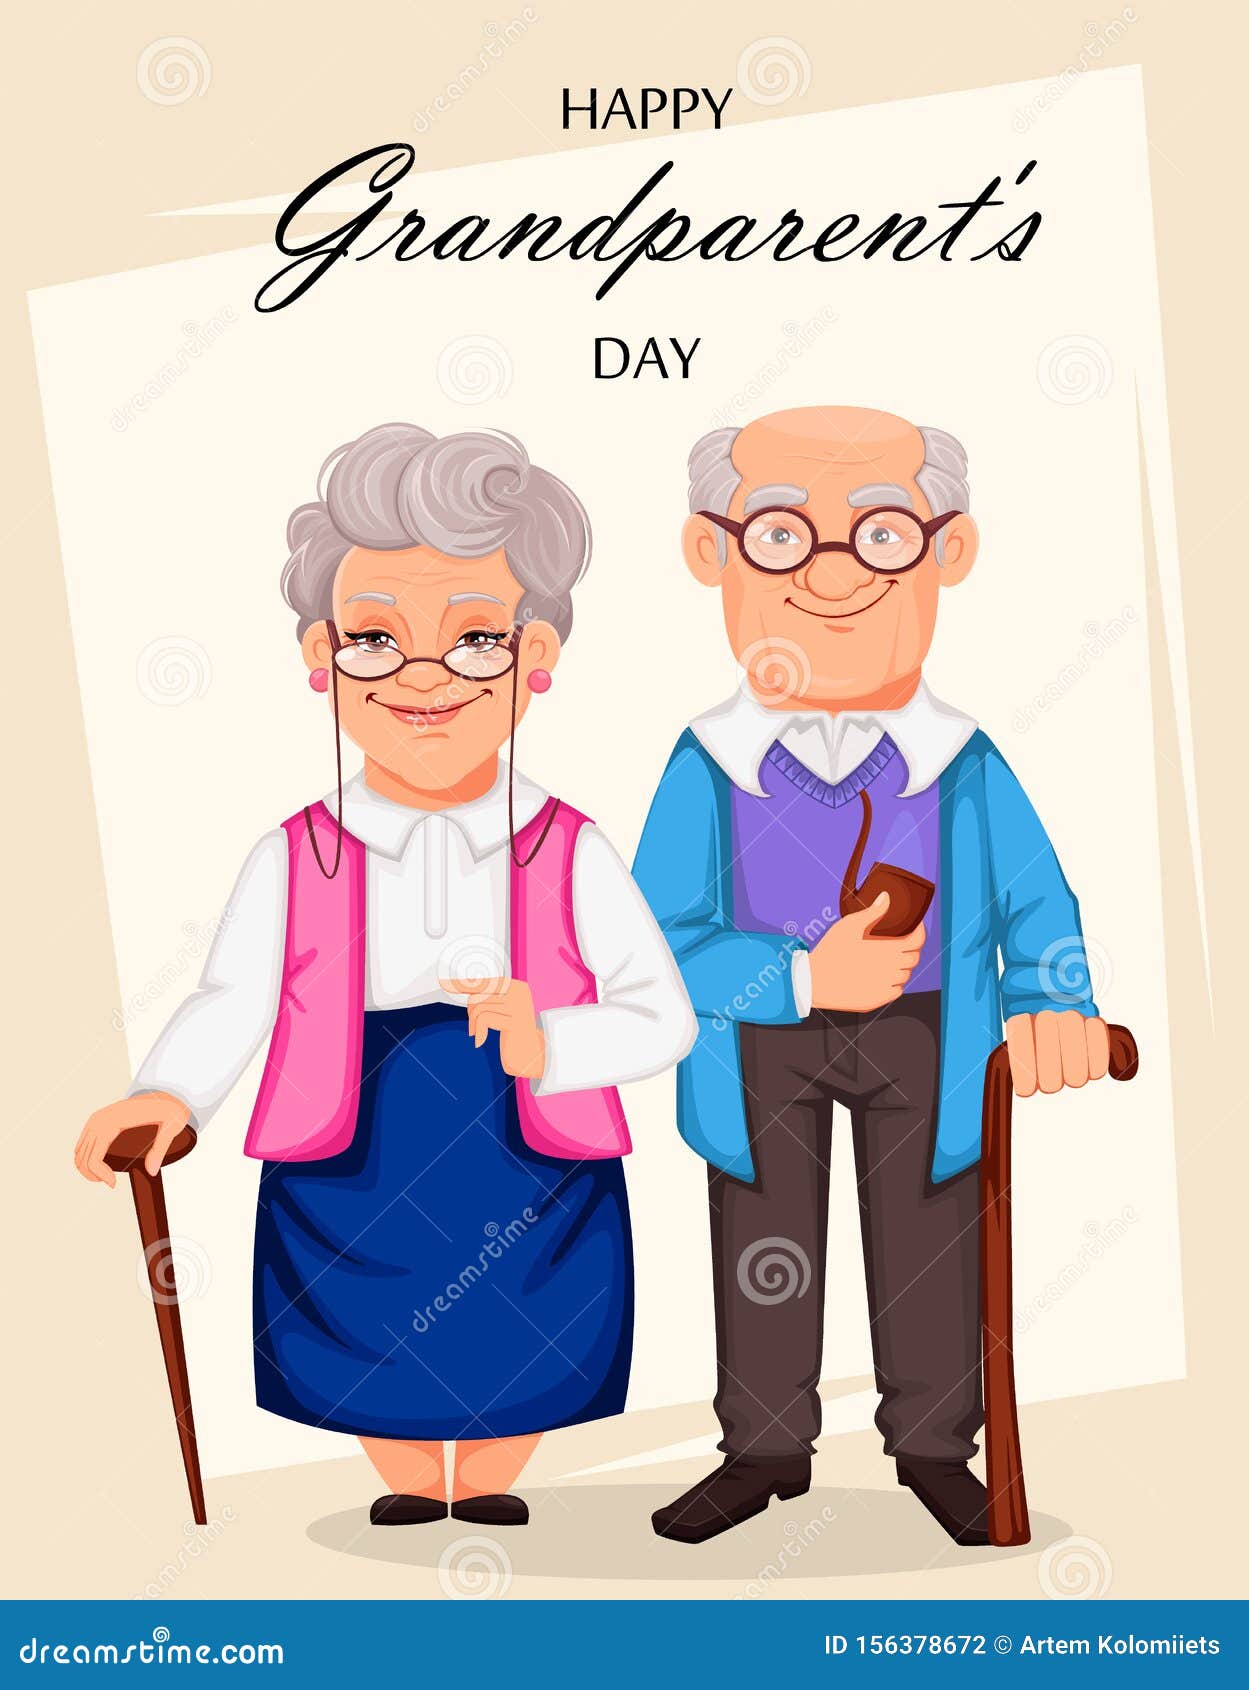 Happy Grandparents Day Greeting Card Stock Vector - Illustration of ...